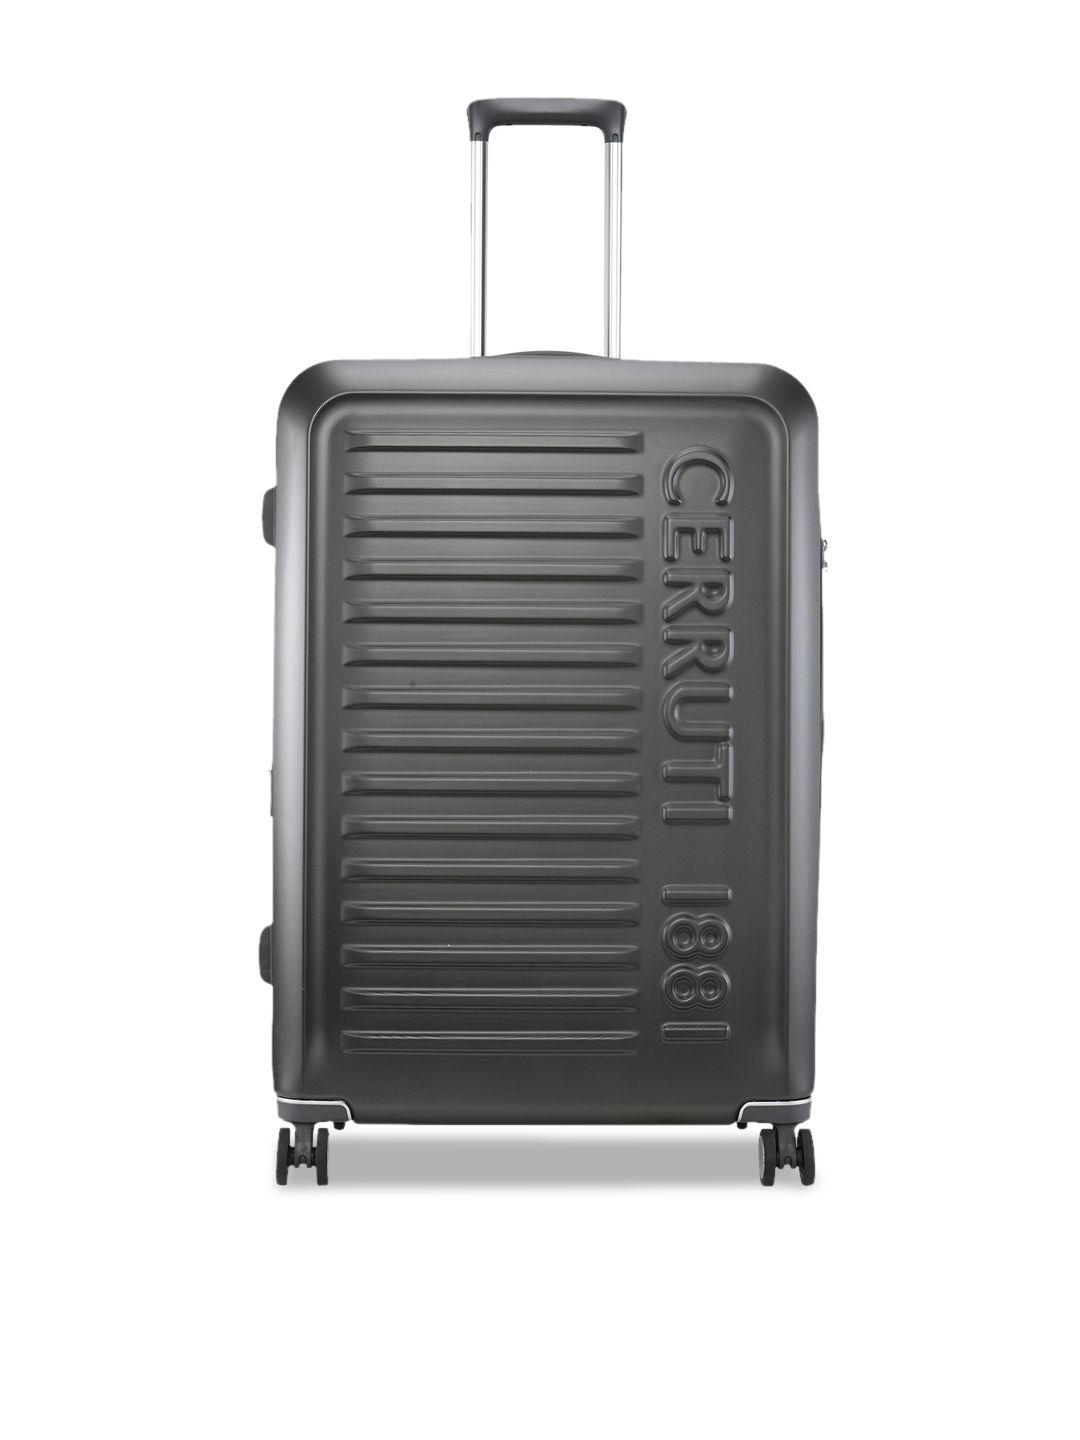 cerruti textured hard-sided large trolley suitcase